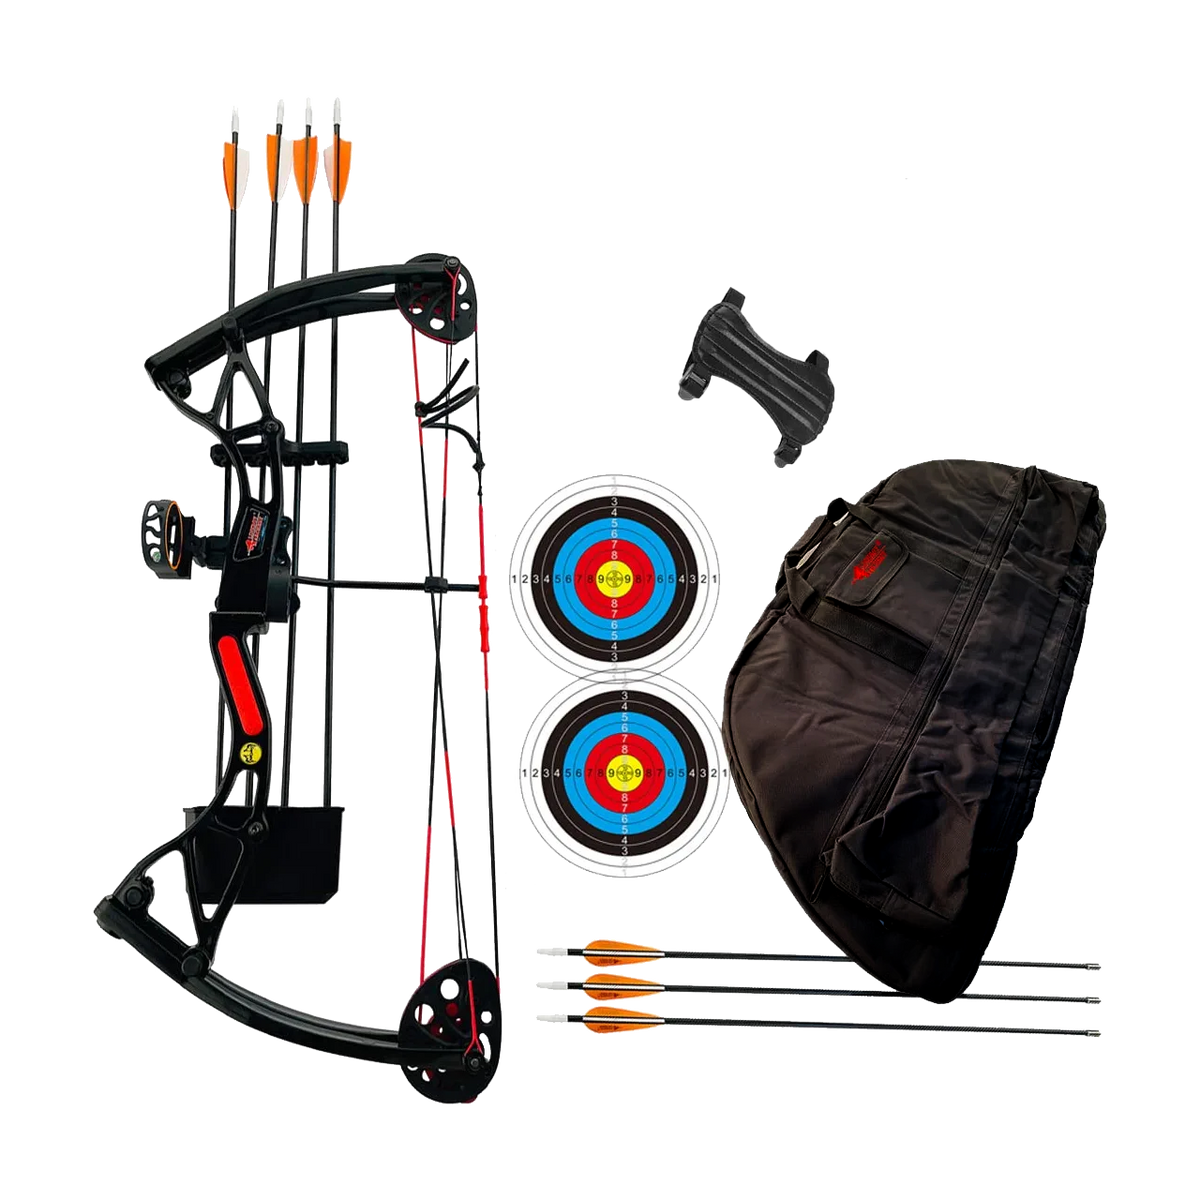 Archery Mini Compound Bow Kit 45Lbs Shooting Bow Hunting Shooting Accessories  Bowfishing Compound Bow for Adult Youth Shooting Fishing, Compound Bows -   Canada